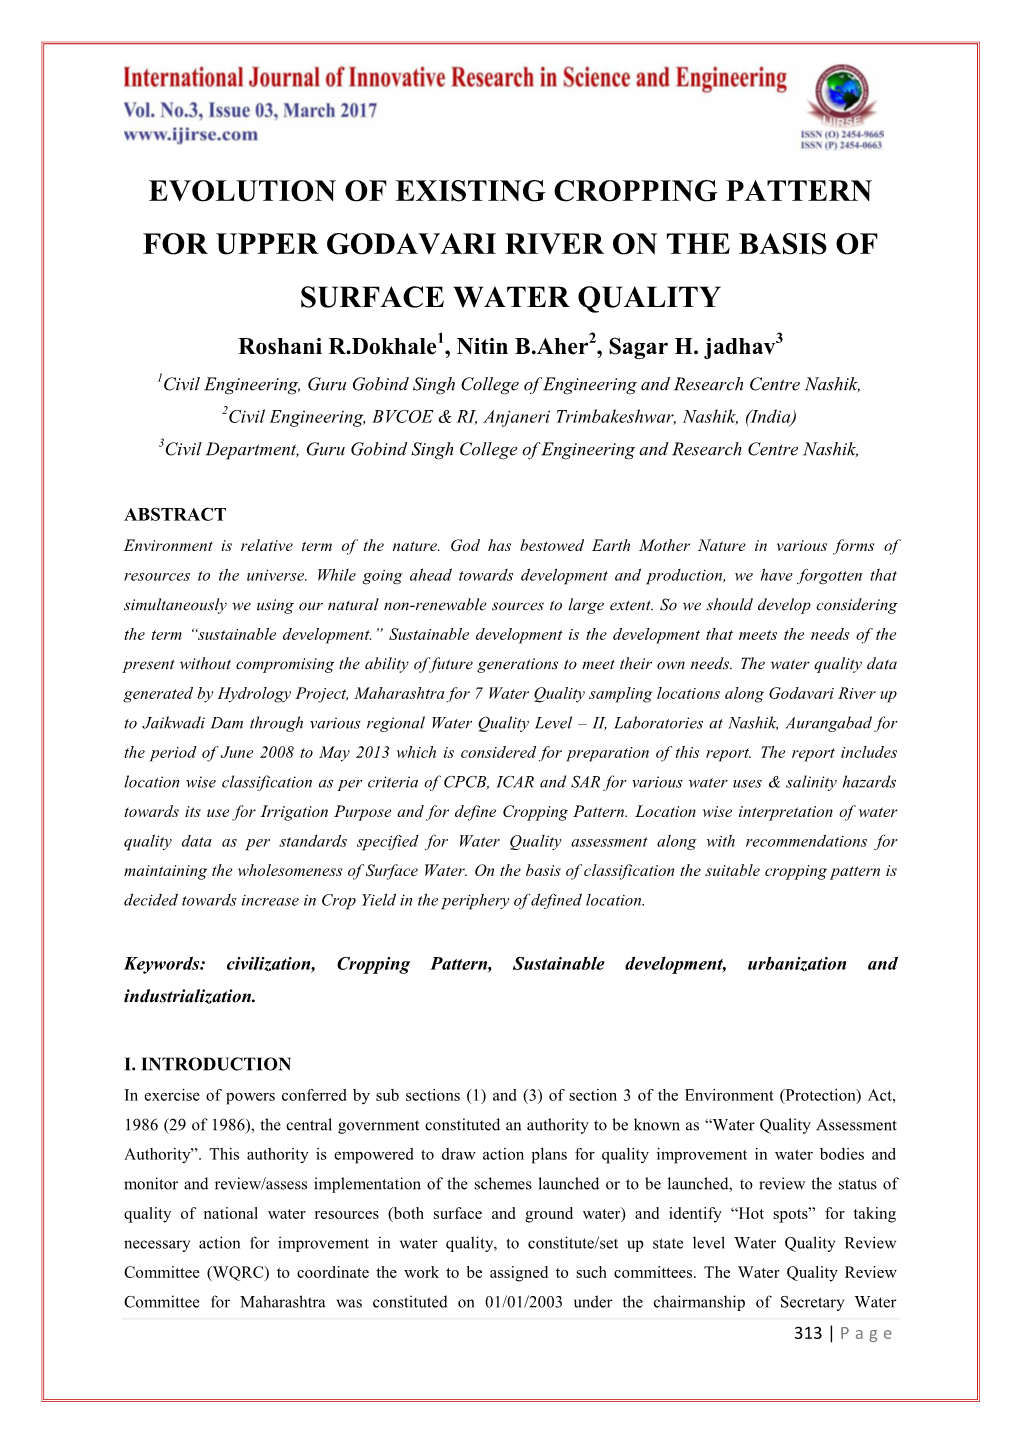 EVOLUTION of EXISTING CROPPING PATTERN for UPPER GODAVARI RIVER on the BASIS of SURFACE WATER QUALITY Roshani R.Dokhale1, Nitin B.Aher2, Sagar H